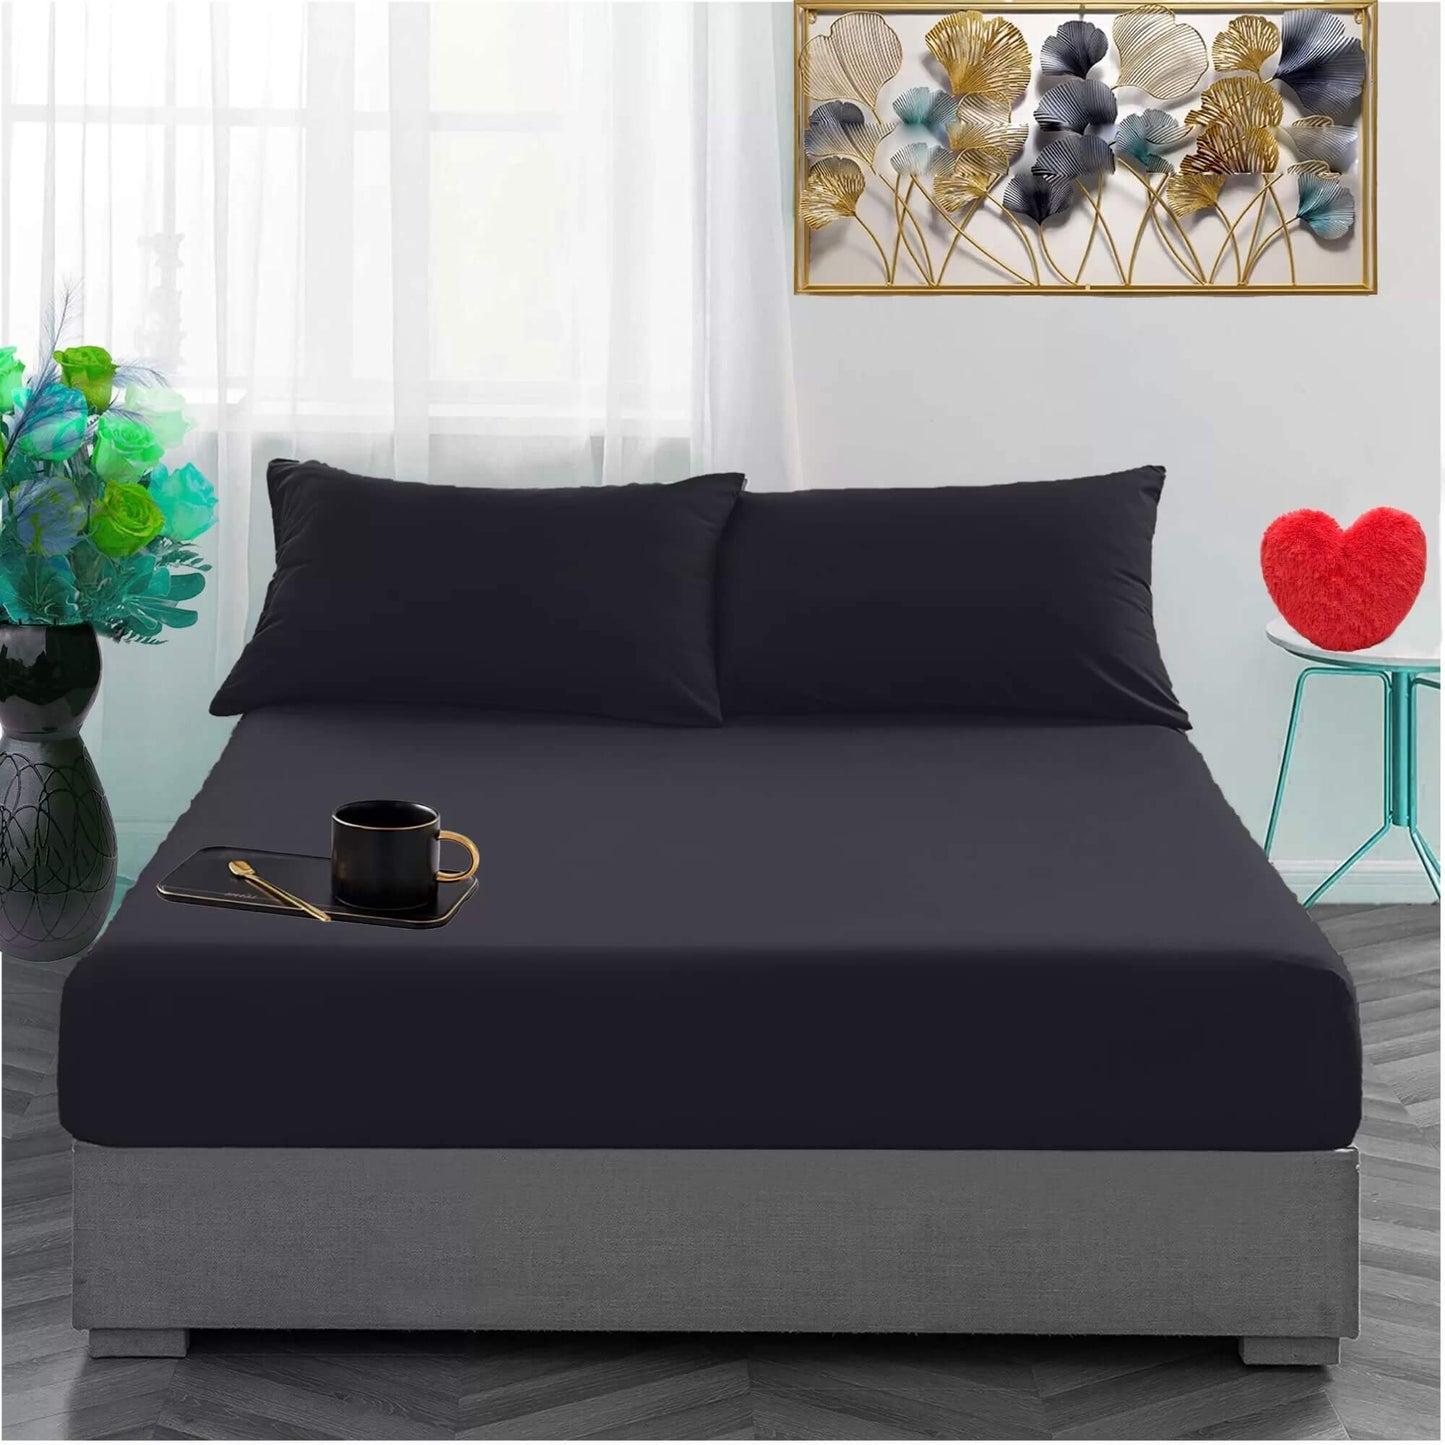 Small Double Fitted Sheet 100% Brushed Cotton Bed Sheet - TheComfortshop.co.ukBed Sheets0721718977339thecomfortshopTheComfortshop.co.ukFlannelette FIT Black 4FT-1Black4FT Small DoubleSmall Double Fitted Sheet 100% Brushed Cotton Bed Sheet - TheComfortshop.co.uk